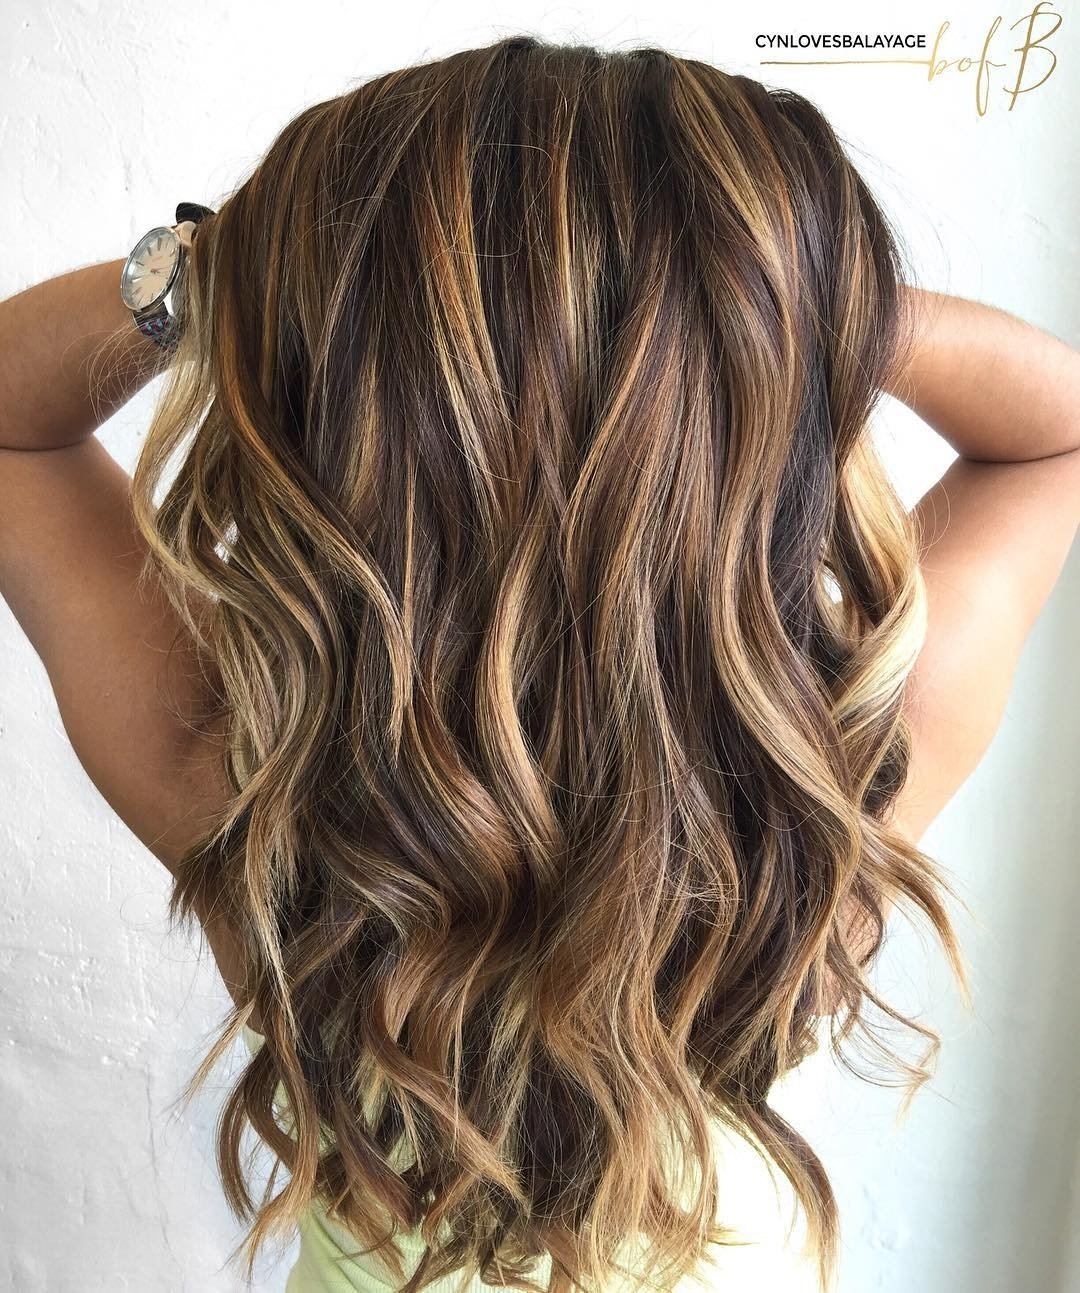 10 Perfect Highlights For Brown Hair Ideas looks with caramel highlights on brown and dark brown hair 6 2022